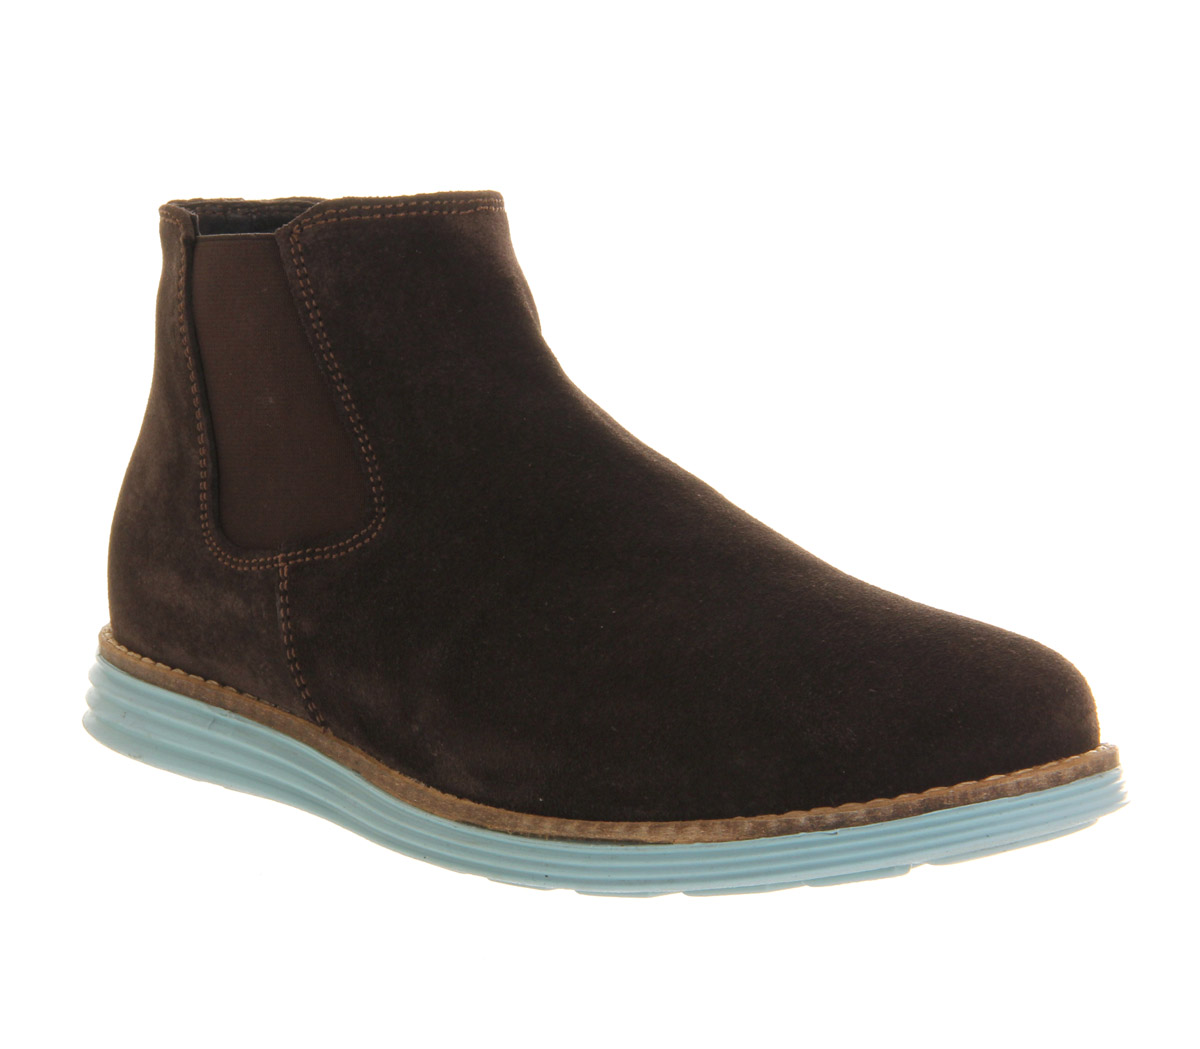 OFFICEComet Chelsea BootChoc Suede Blue Sole